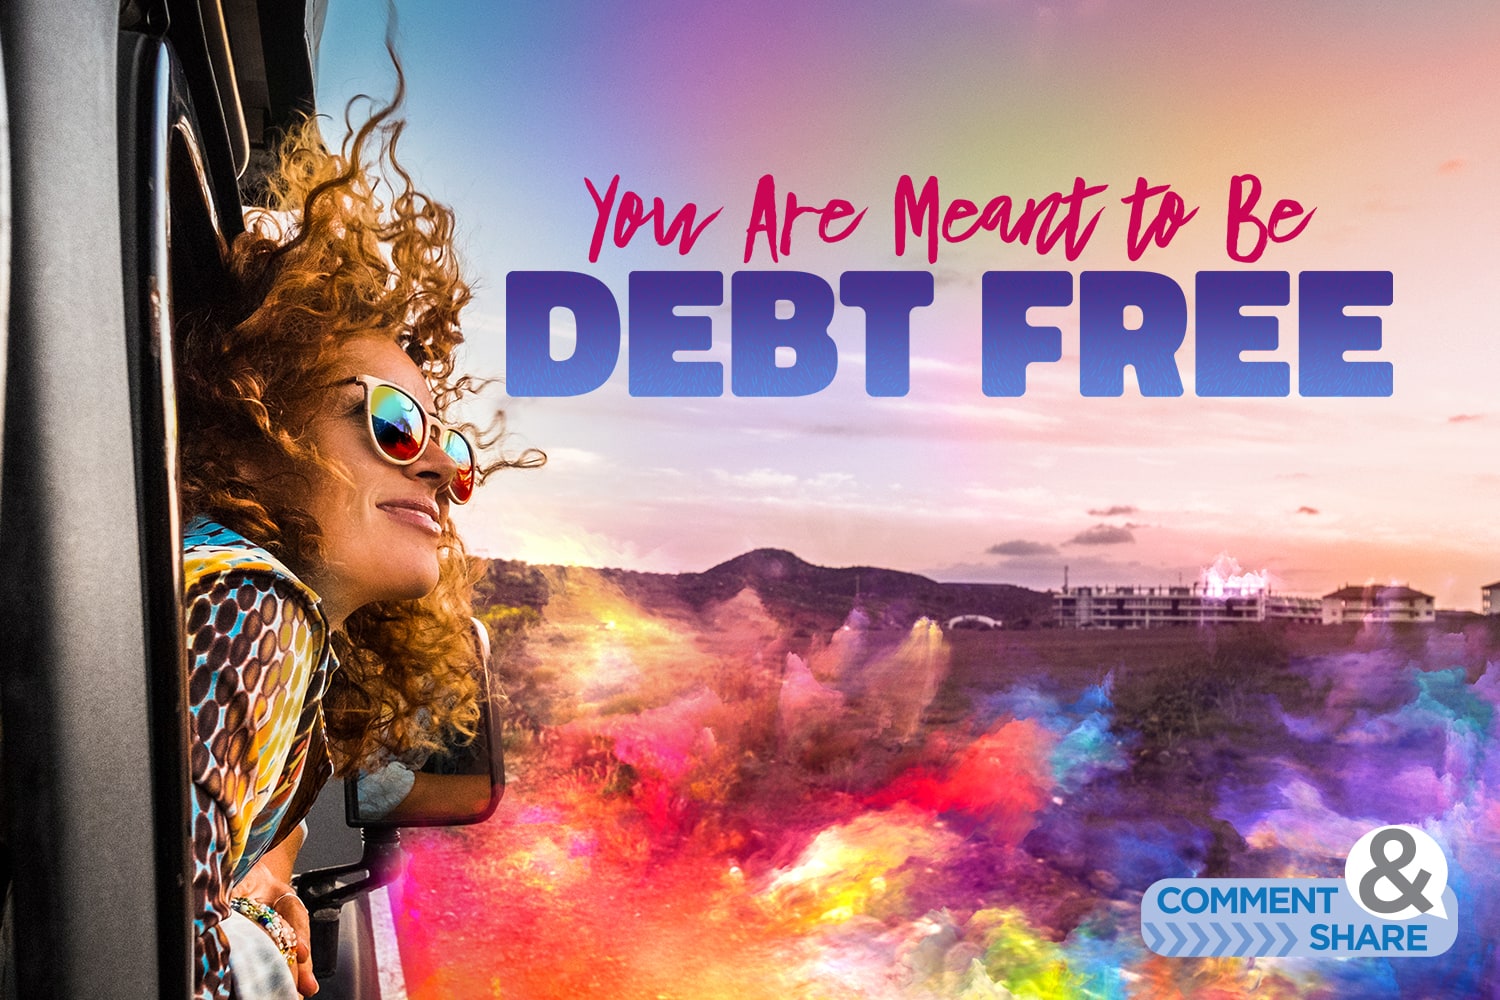 You are meant to be debt free